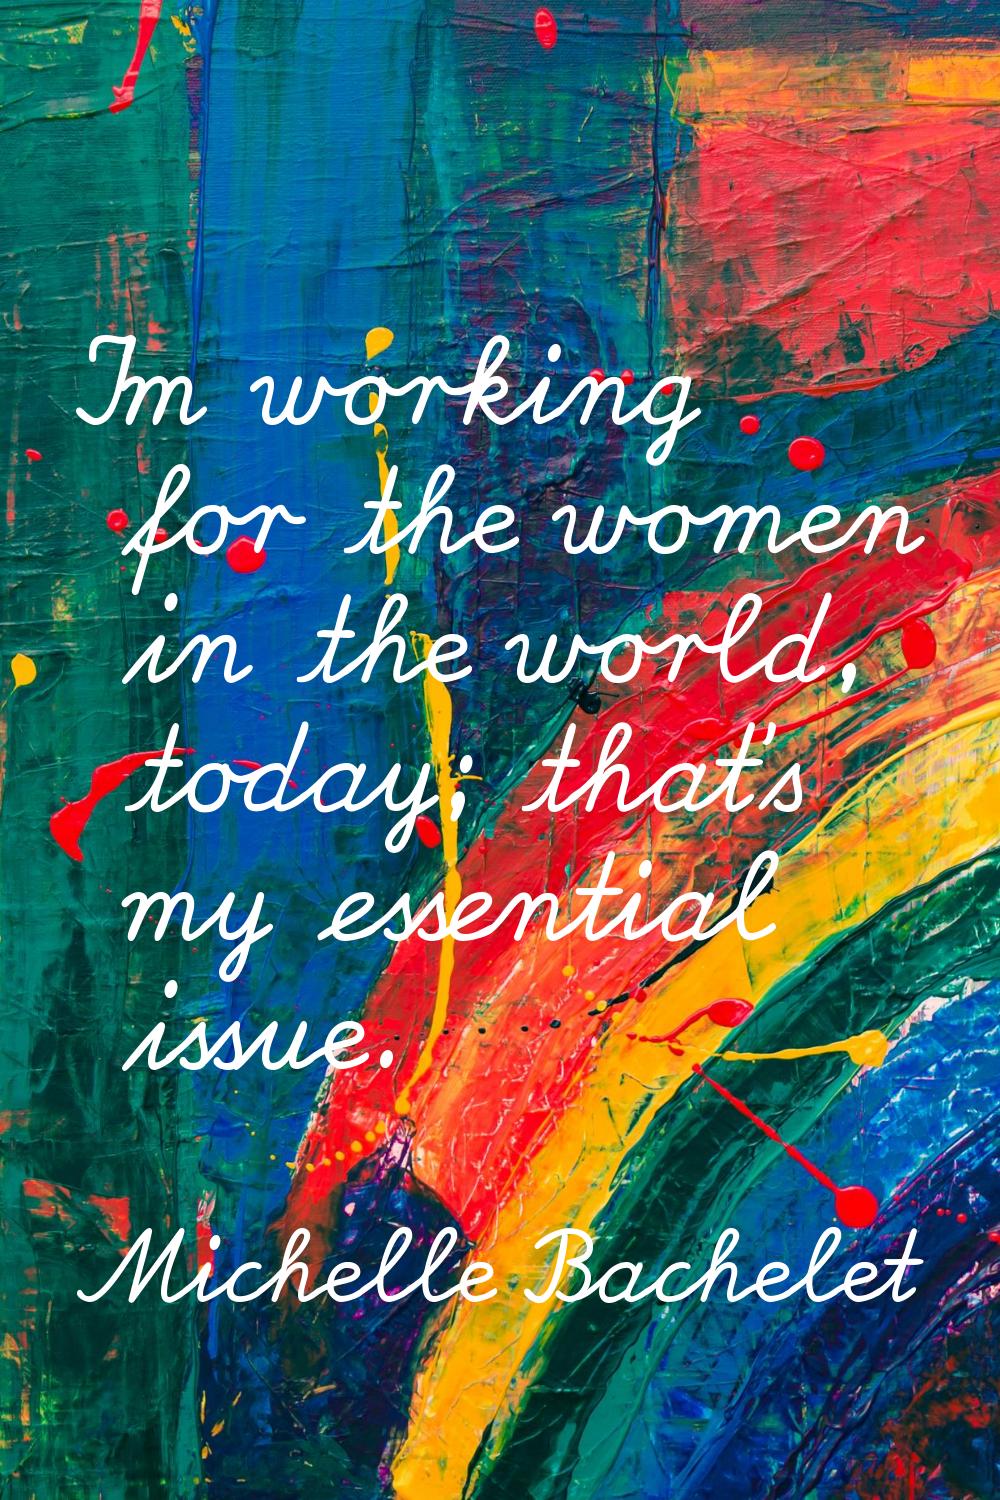 I'm working for the women in the world, today; that's my essential issue.